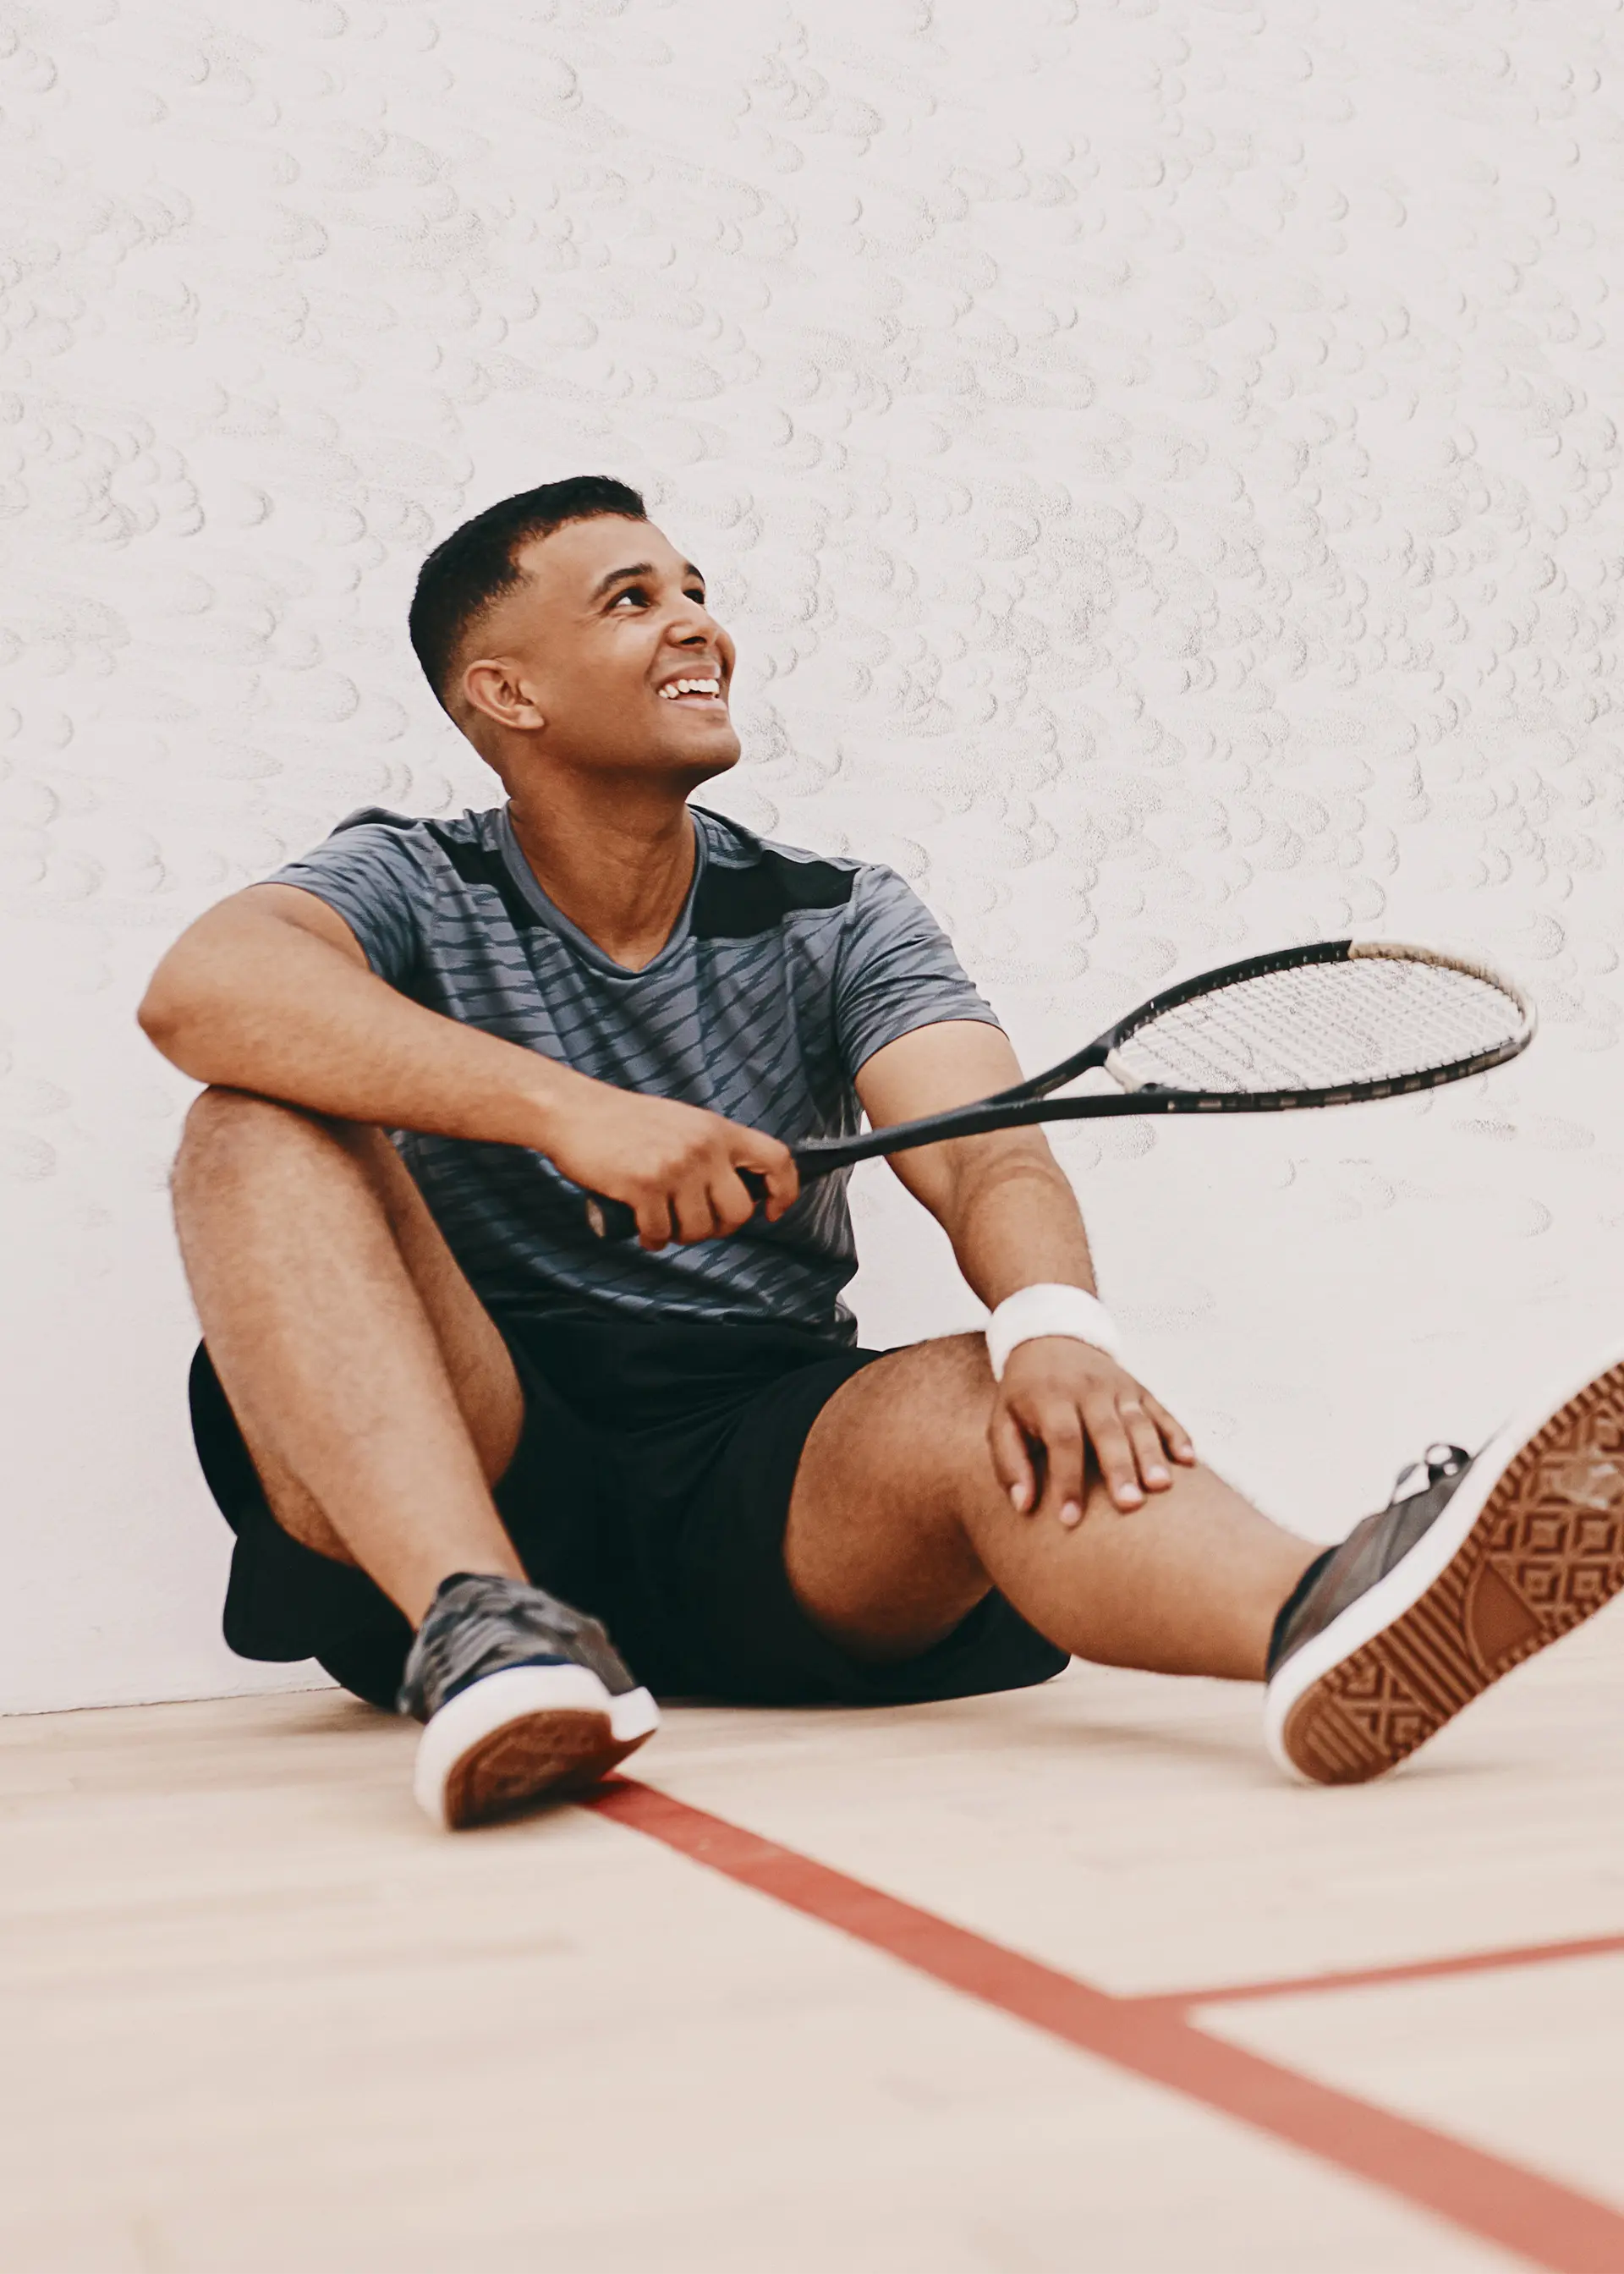 A male squash player sitting and holding a racquet